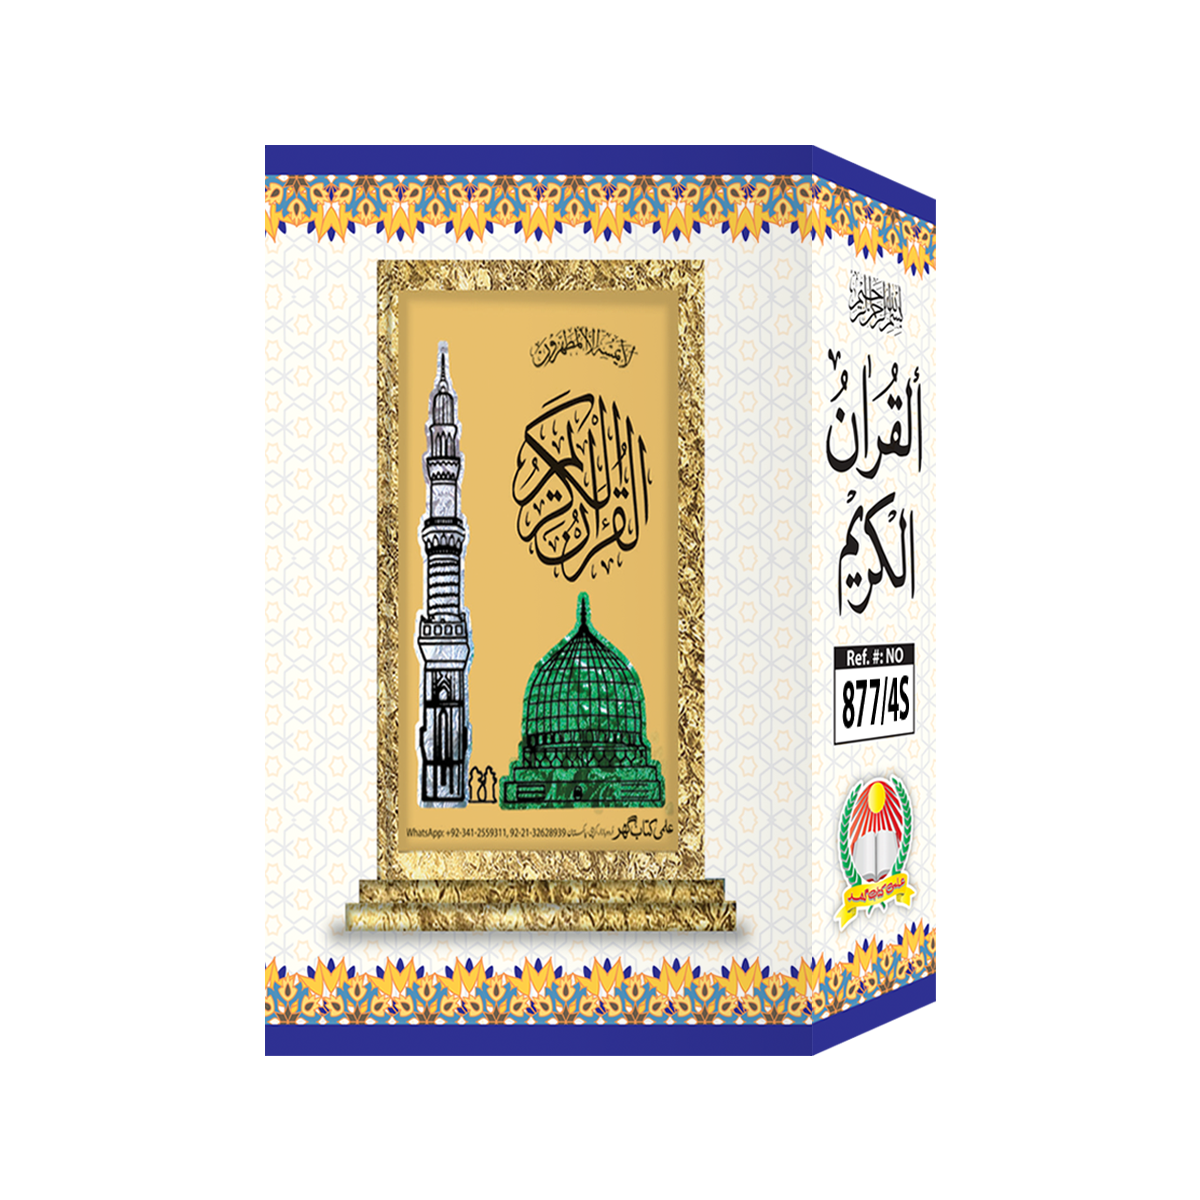 [877/4S] Al-Quran-Ul-Kareem In 16 Lines With Tajweed Rules (Without Translation) - Gift Edition